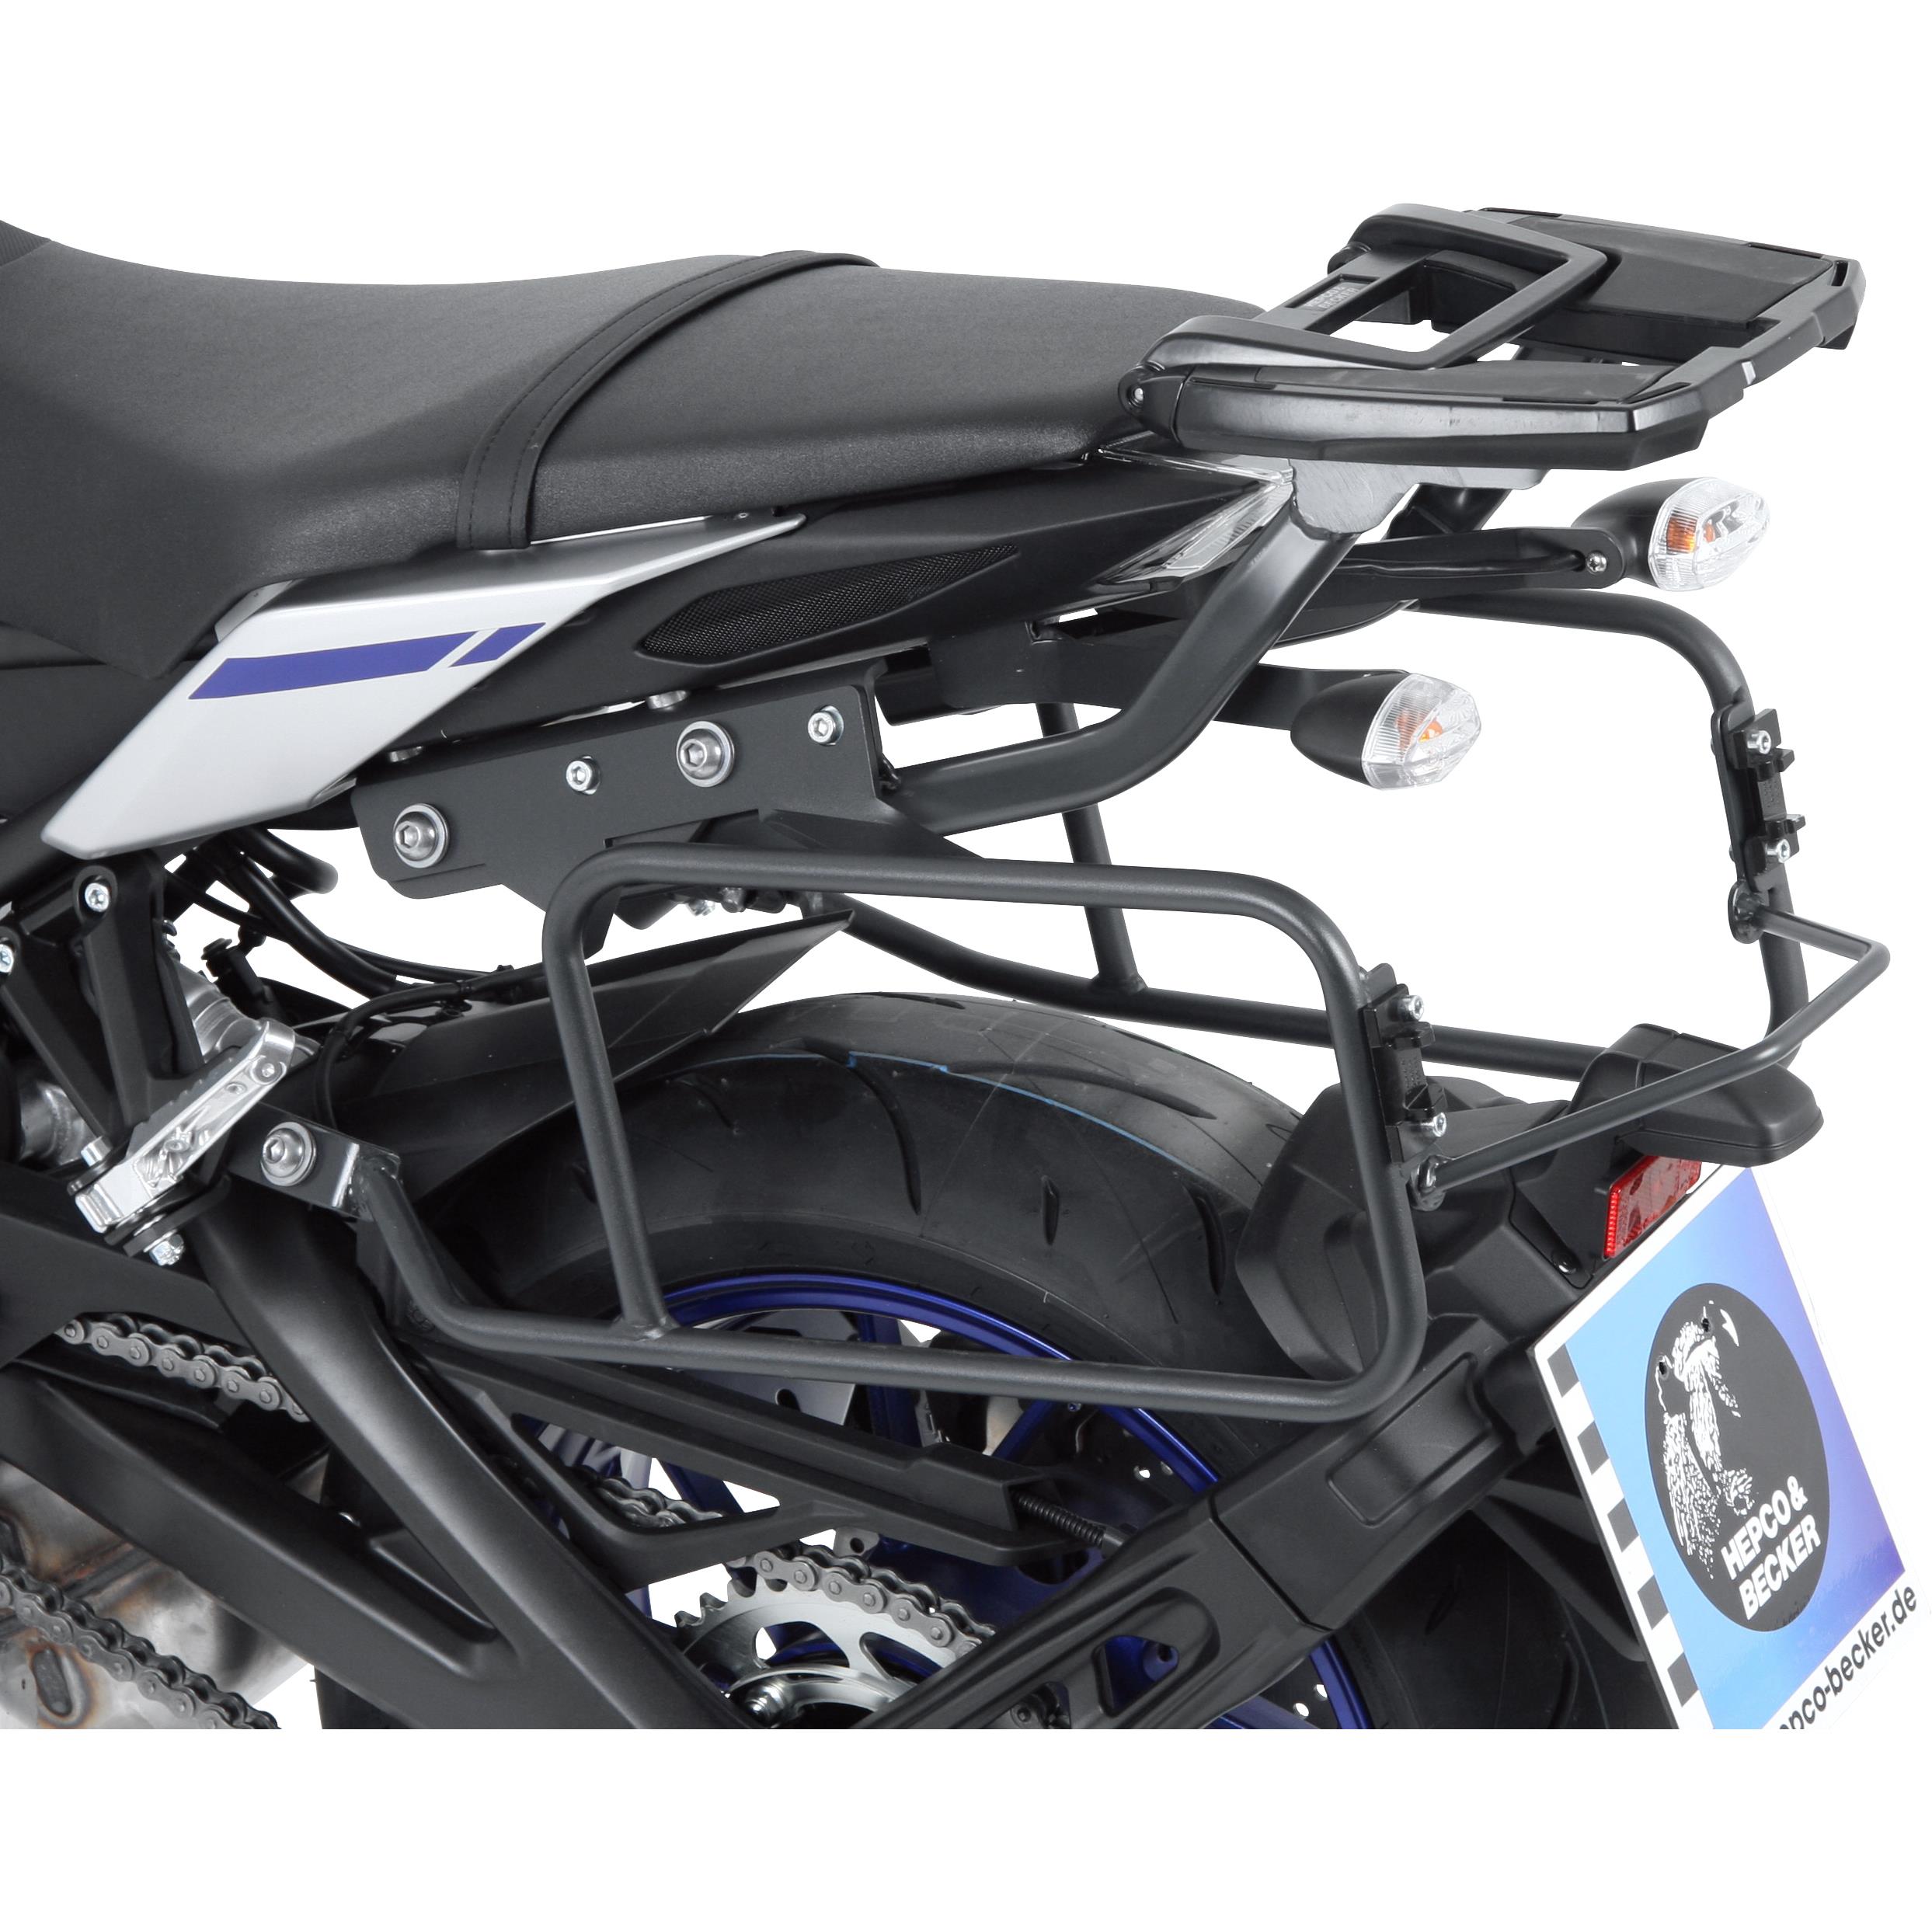 Buy Hepco & Becker Lock-it side rack anthracite for Yamaha MT-09